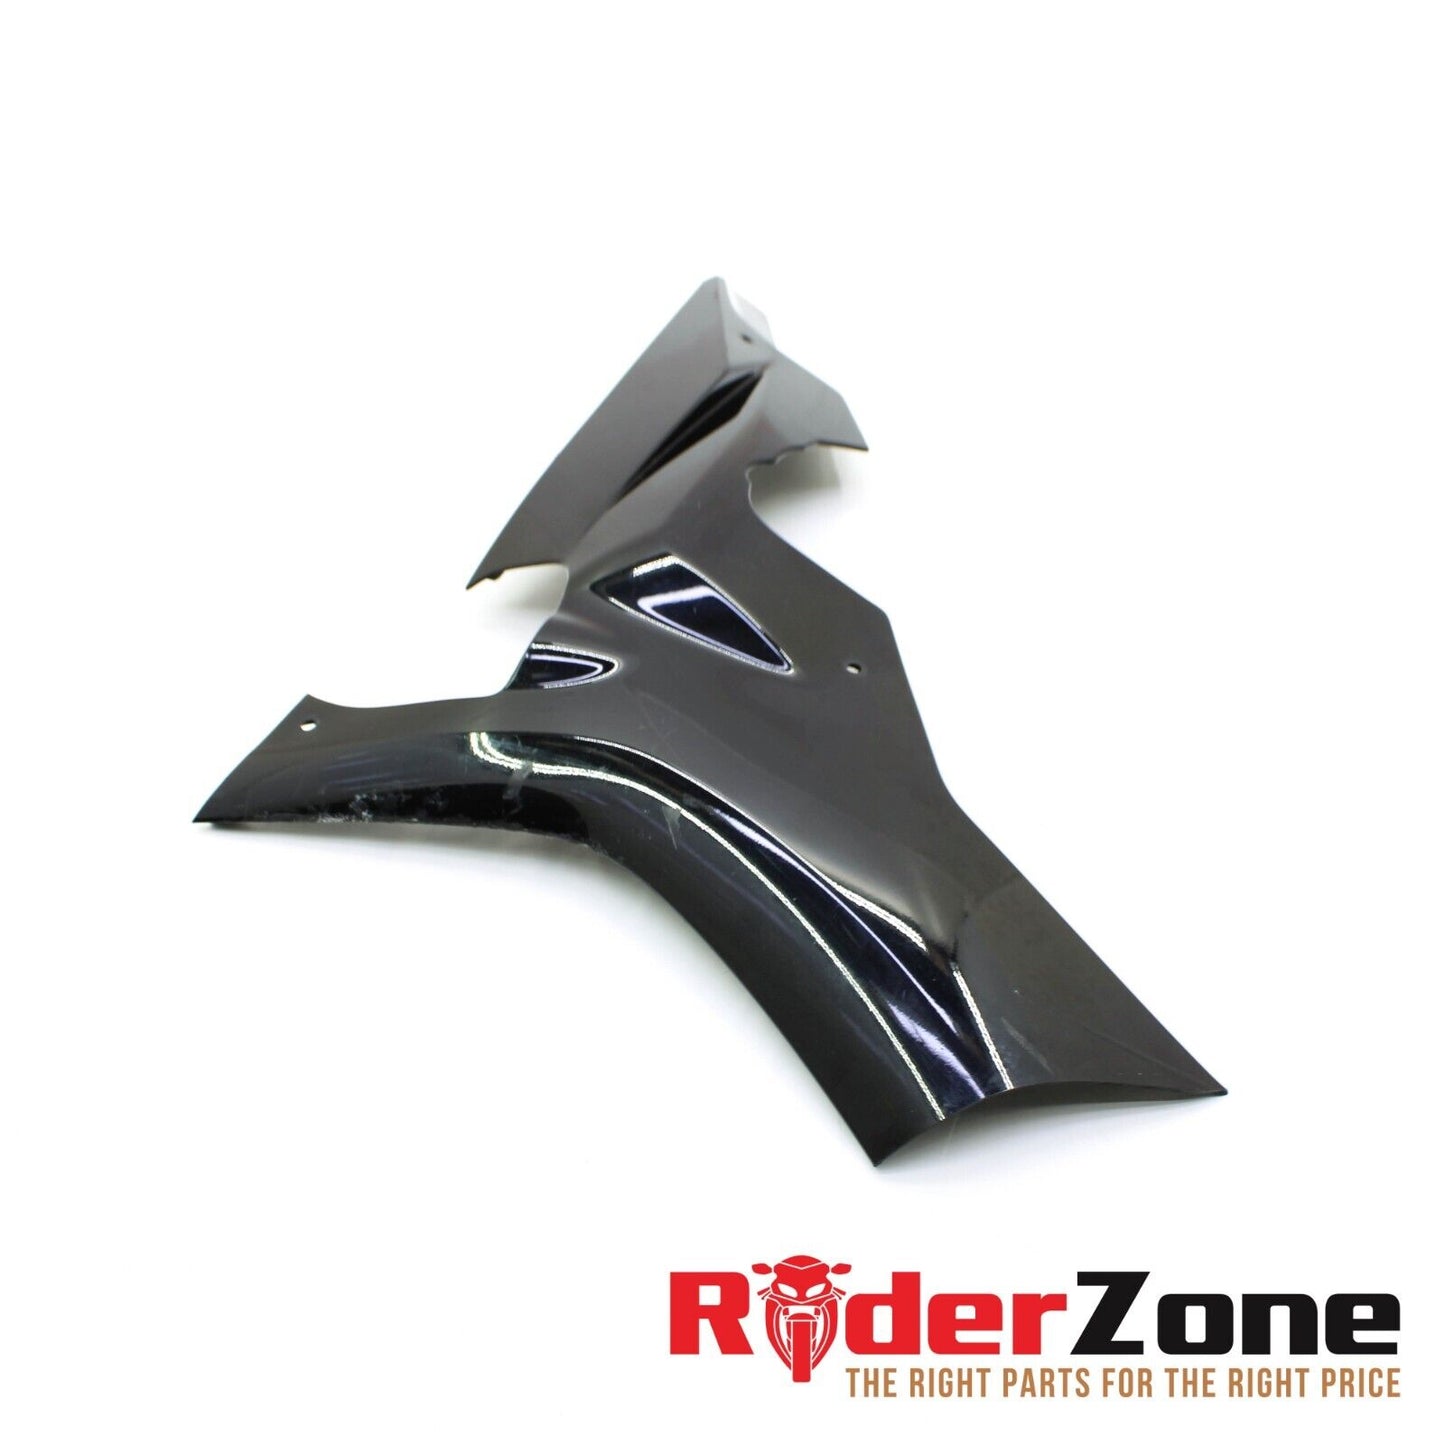 2015 - 2019 YAMAHA YZF R1 FRONT RIGHT SIDE FAIRING COWL PLASTIC UPPER MID BLACK